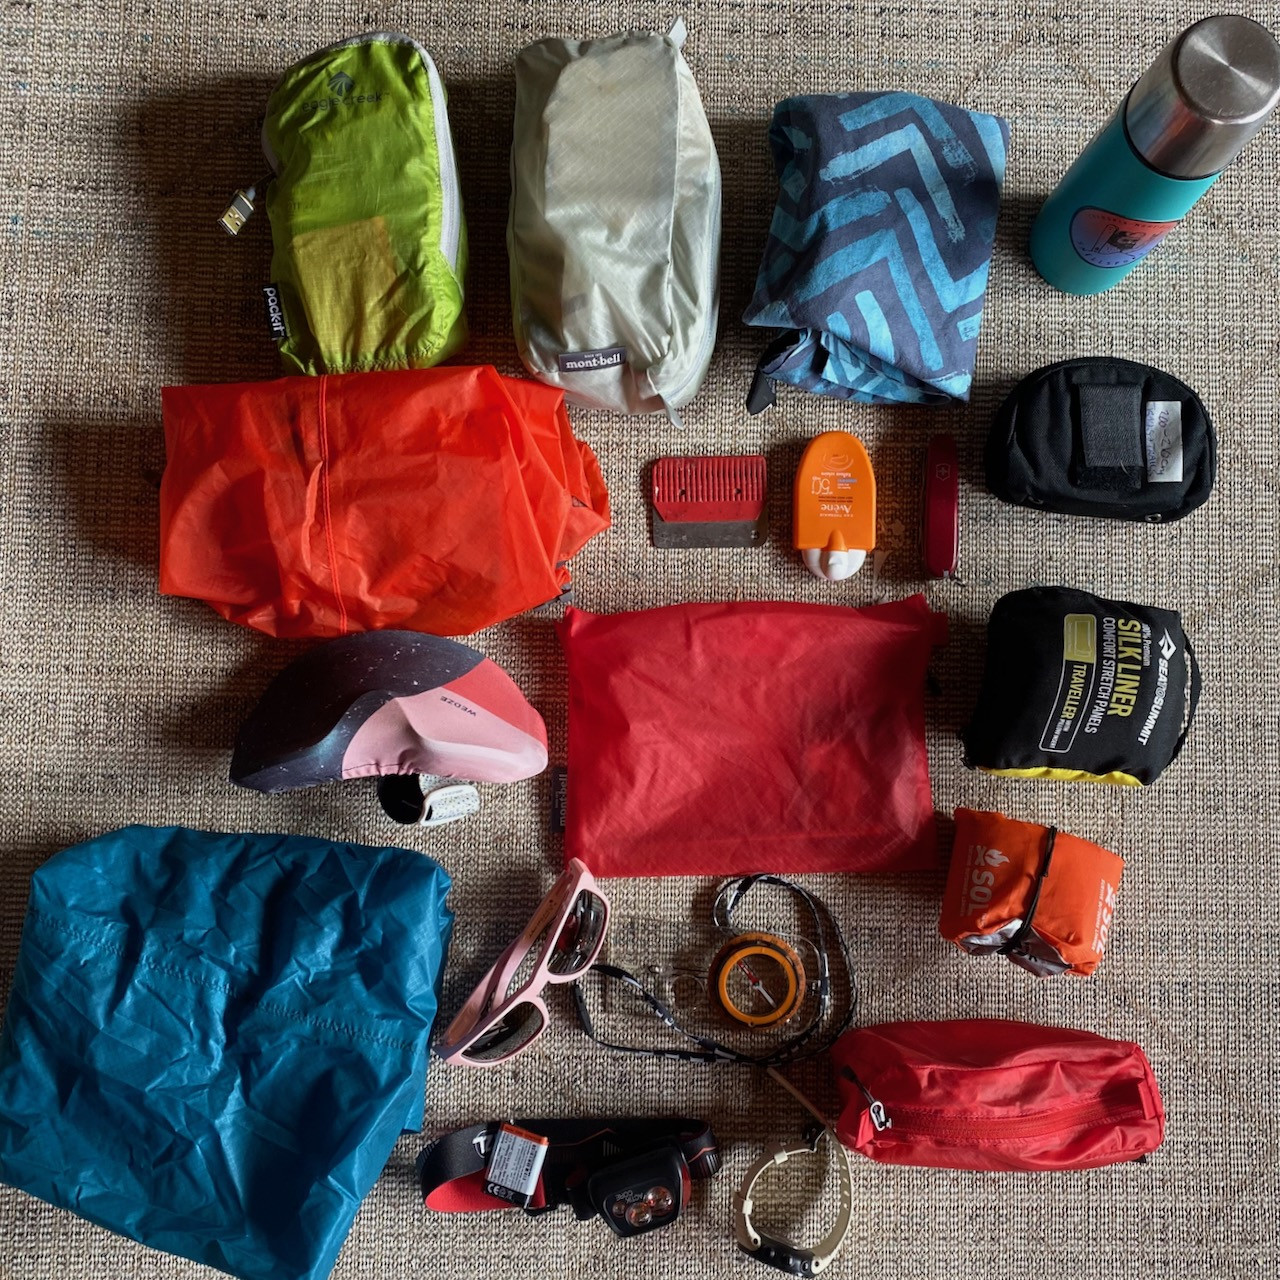 Top tips on light weight packing for a ski adventure